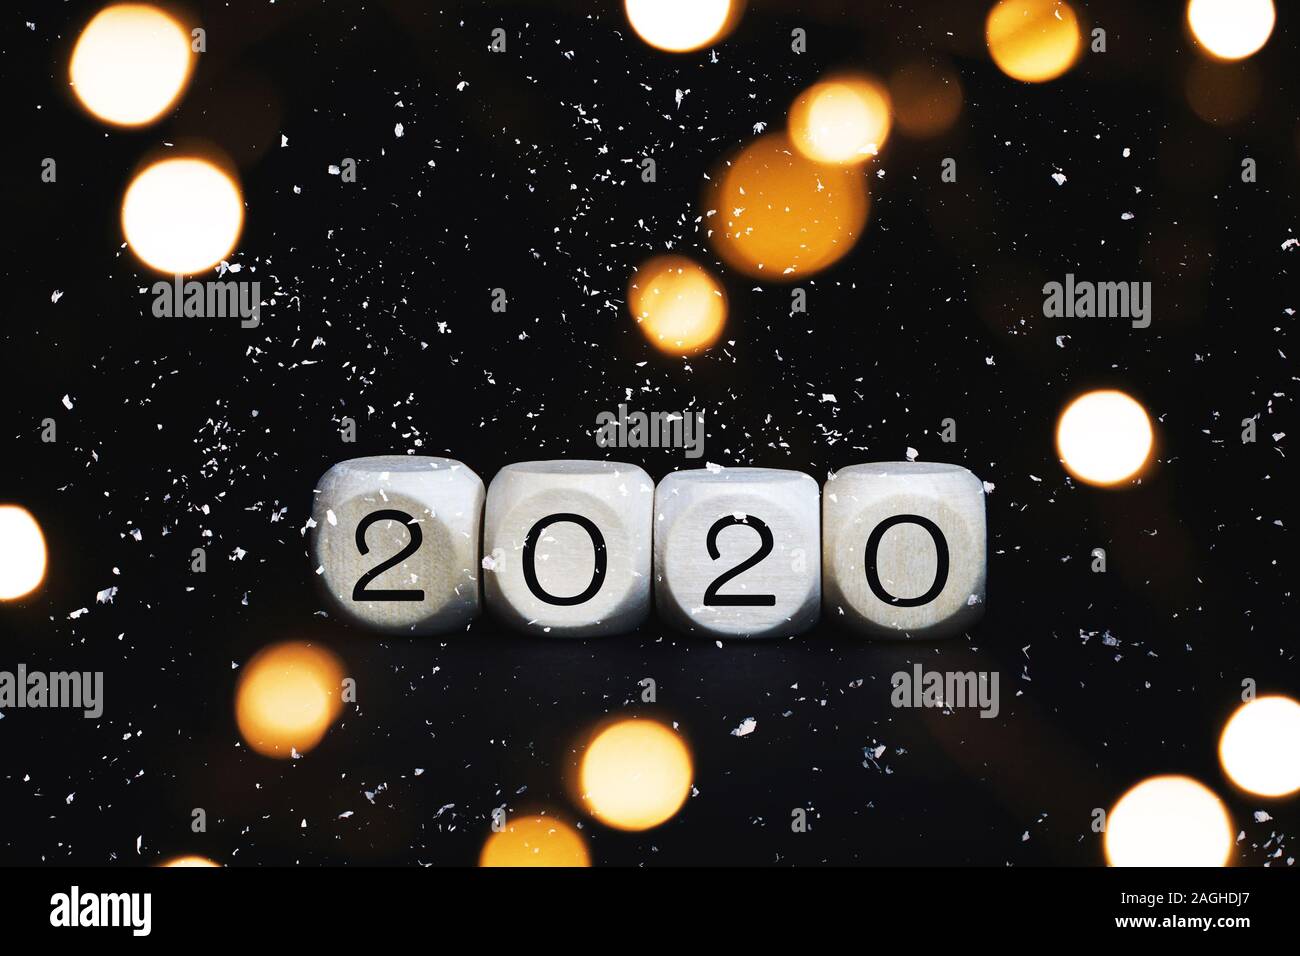 Wooden cubes with 2020 numbers on a black background. Christmas concept greeting card with blurred bokeh lights and snow. Stock Photo